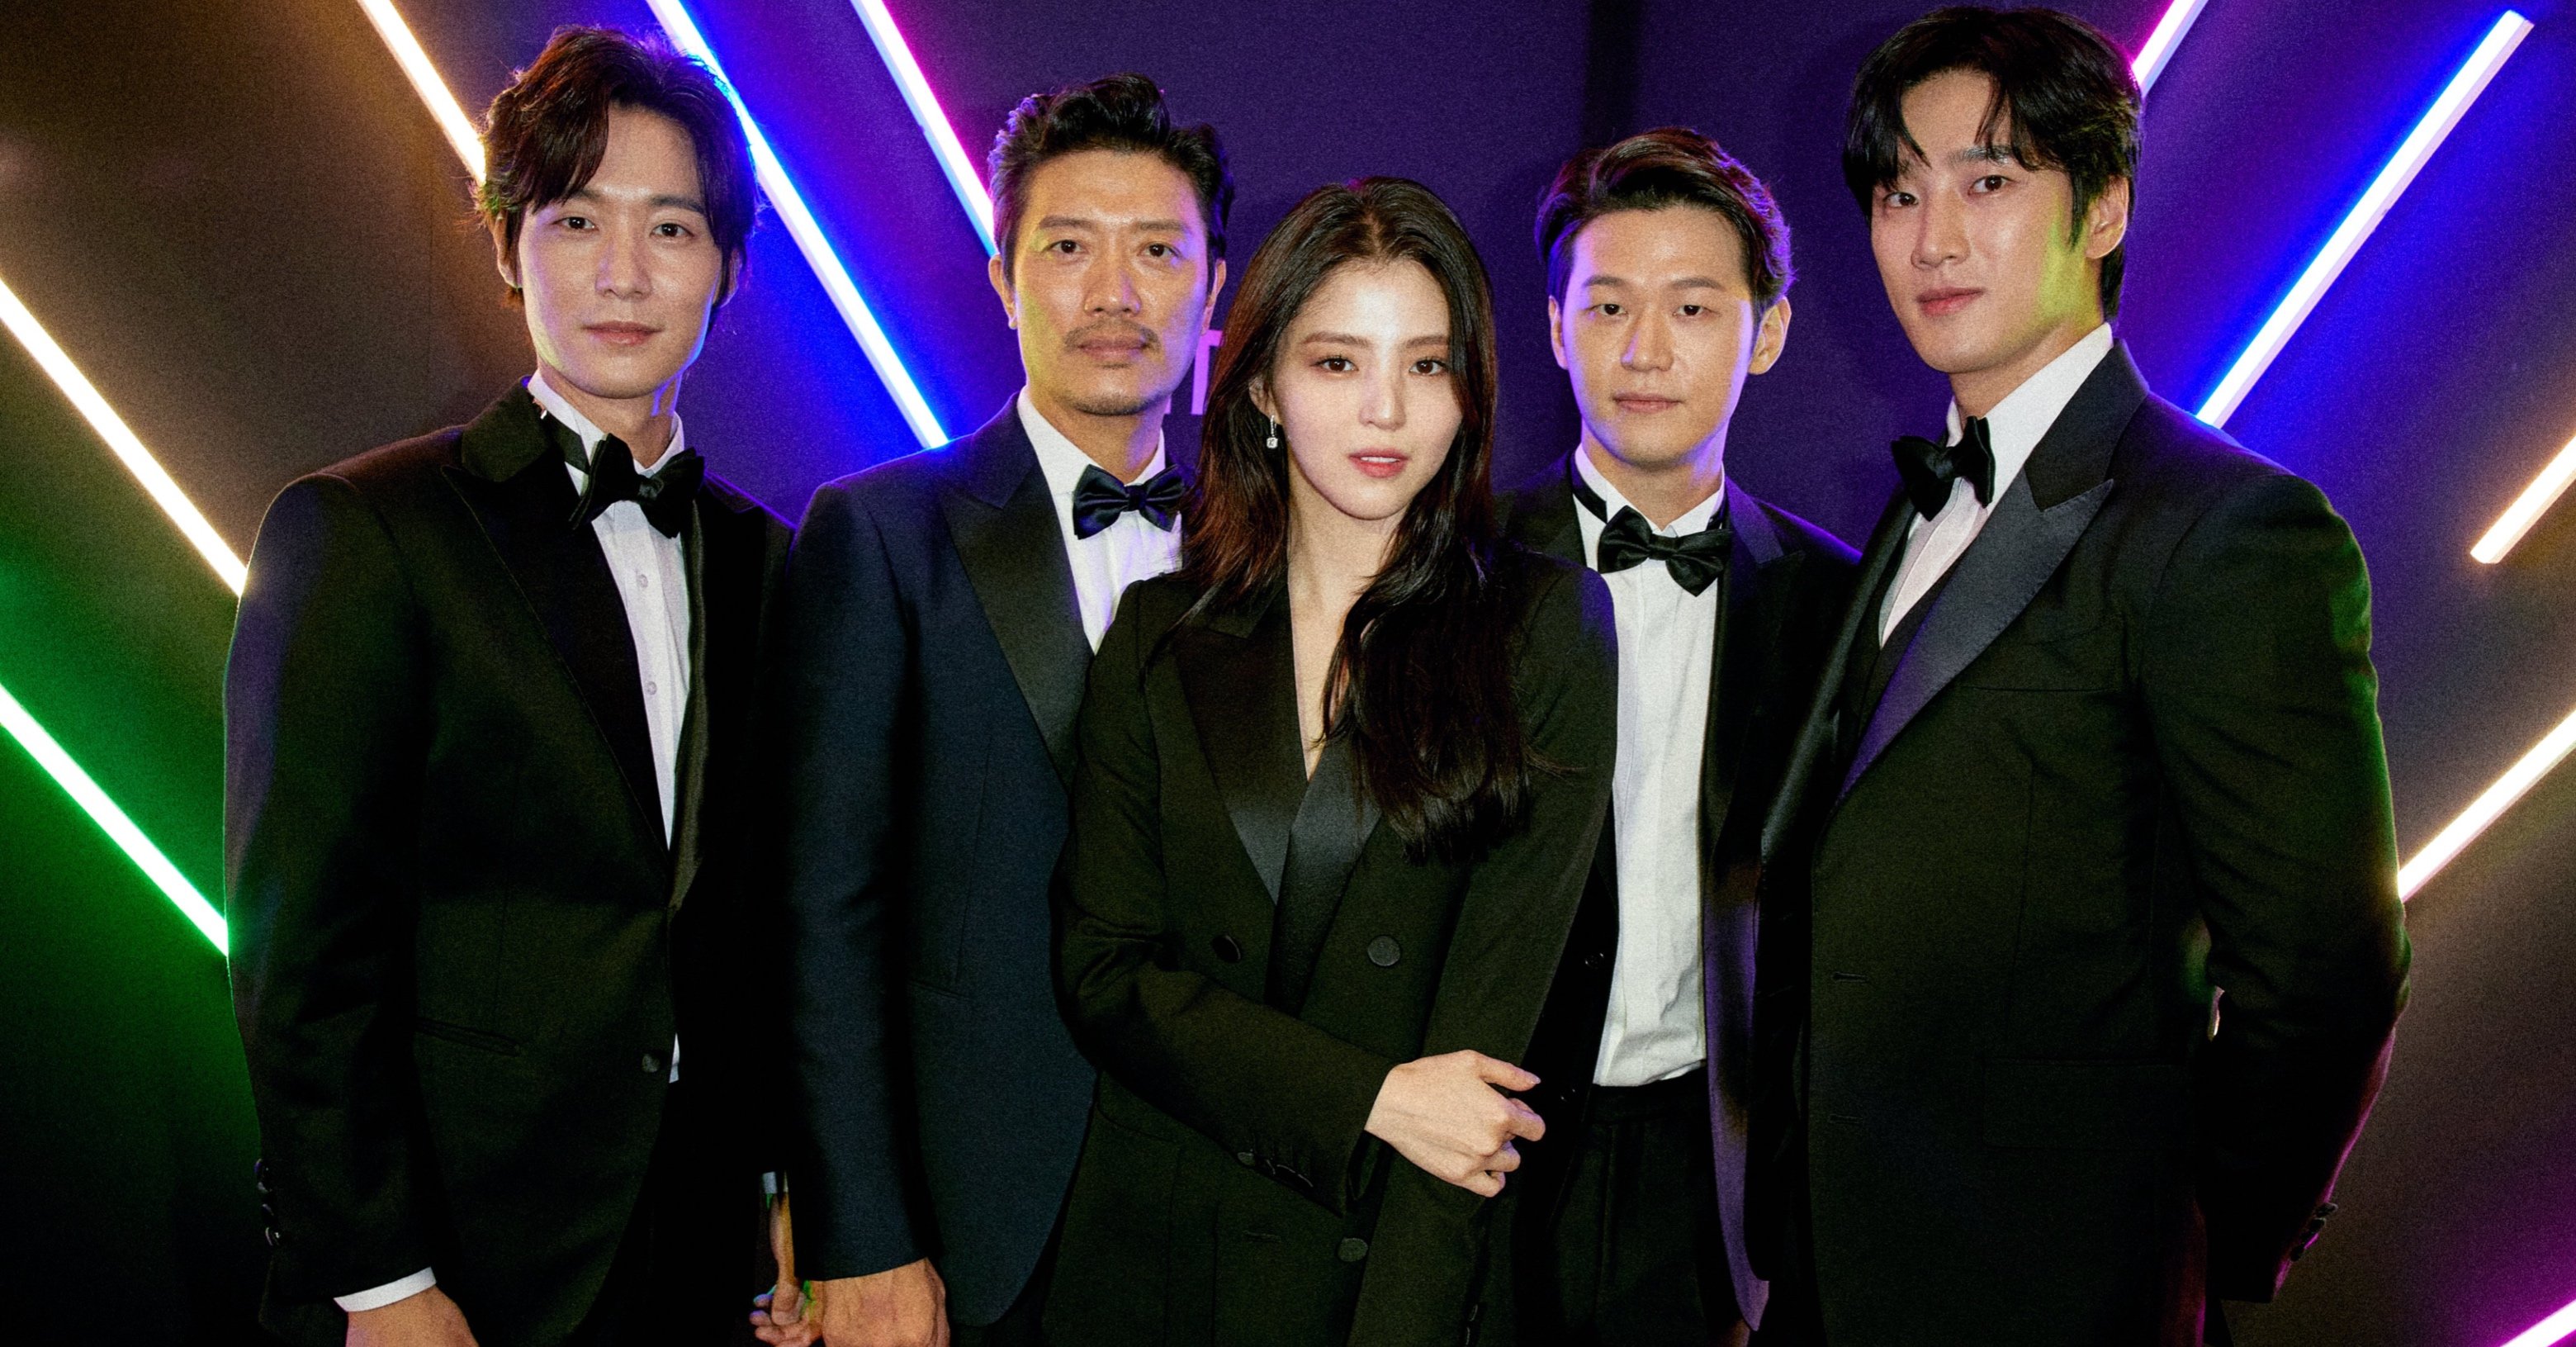 Han So-hee and co-stars for 'My Name' K-drama cast wearing suits and all black ensemble.